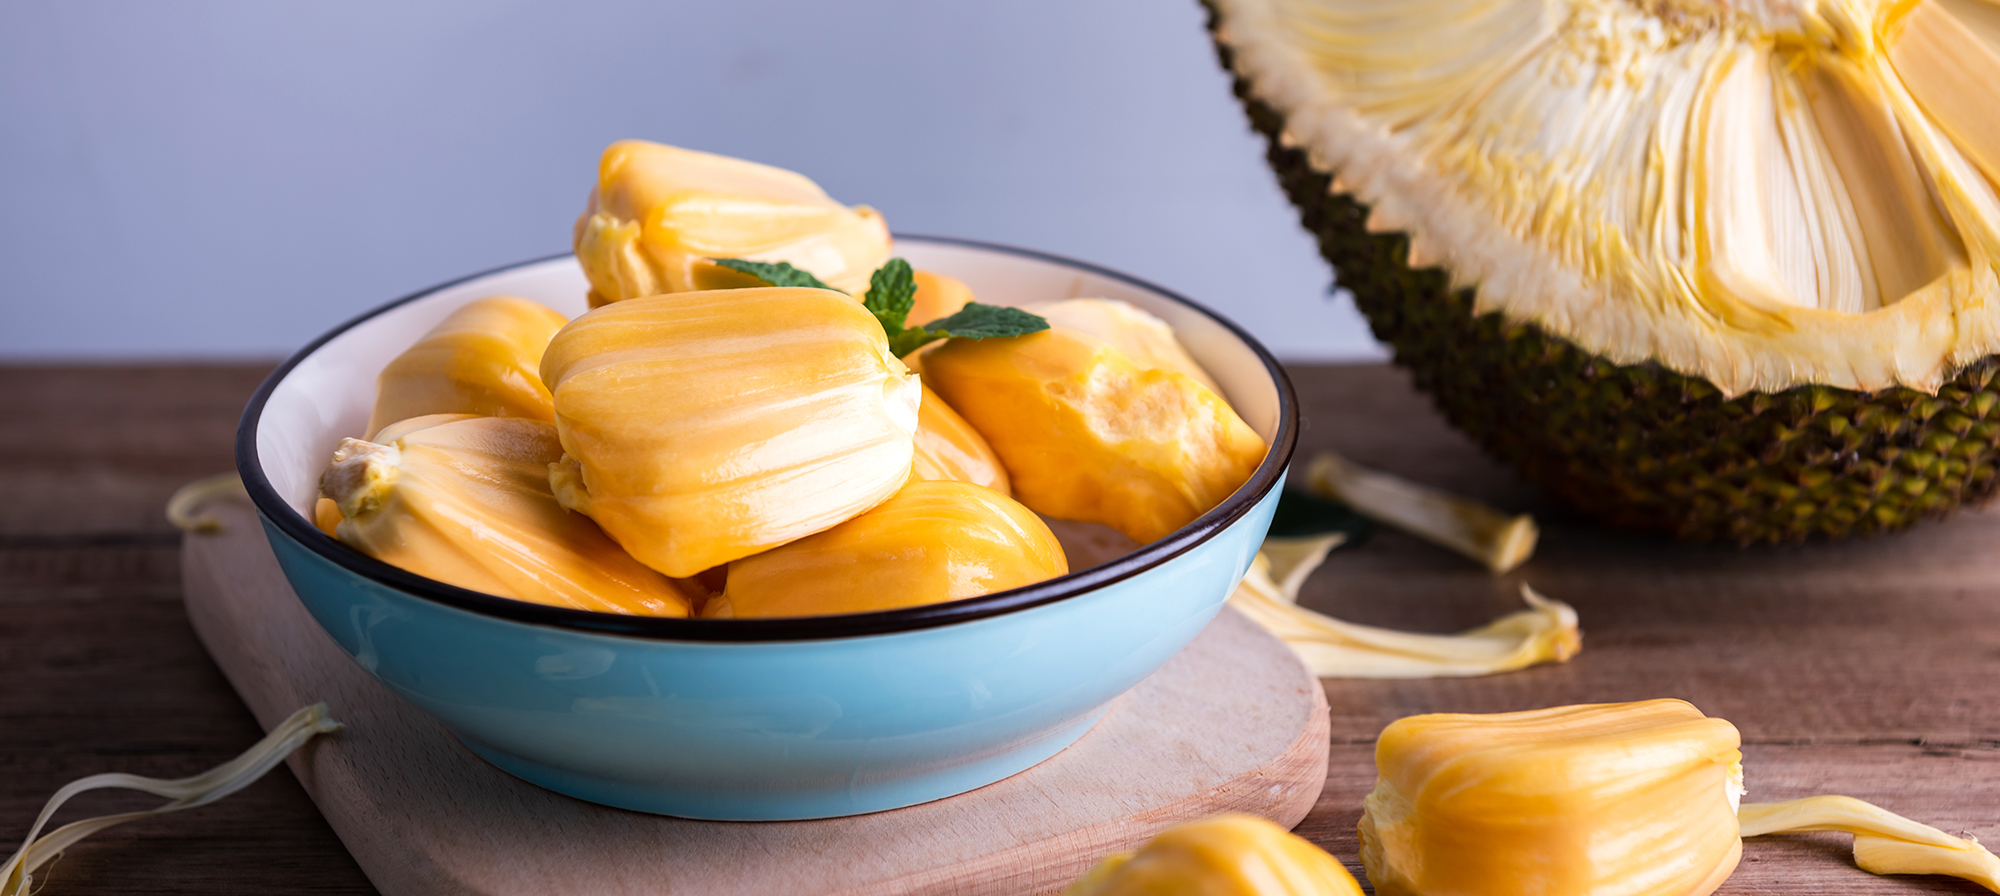 Jackfruit: The Popular Meat Substitute That’s Good for You, Too